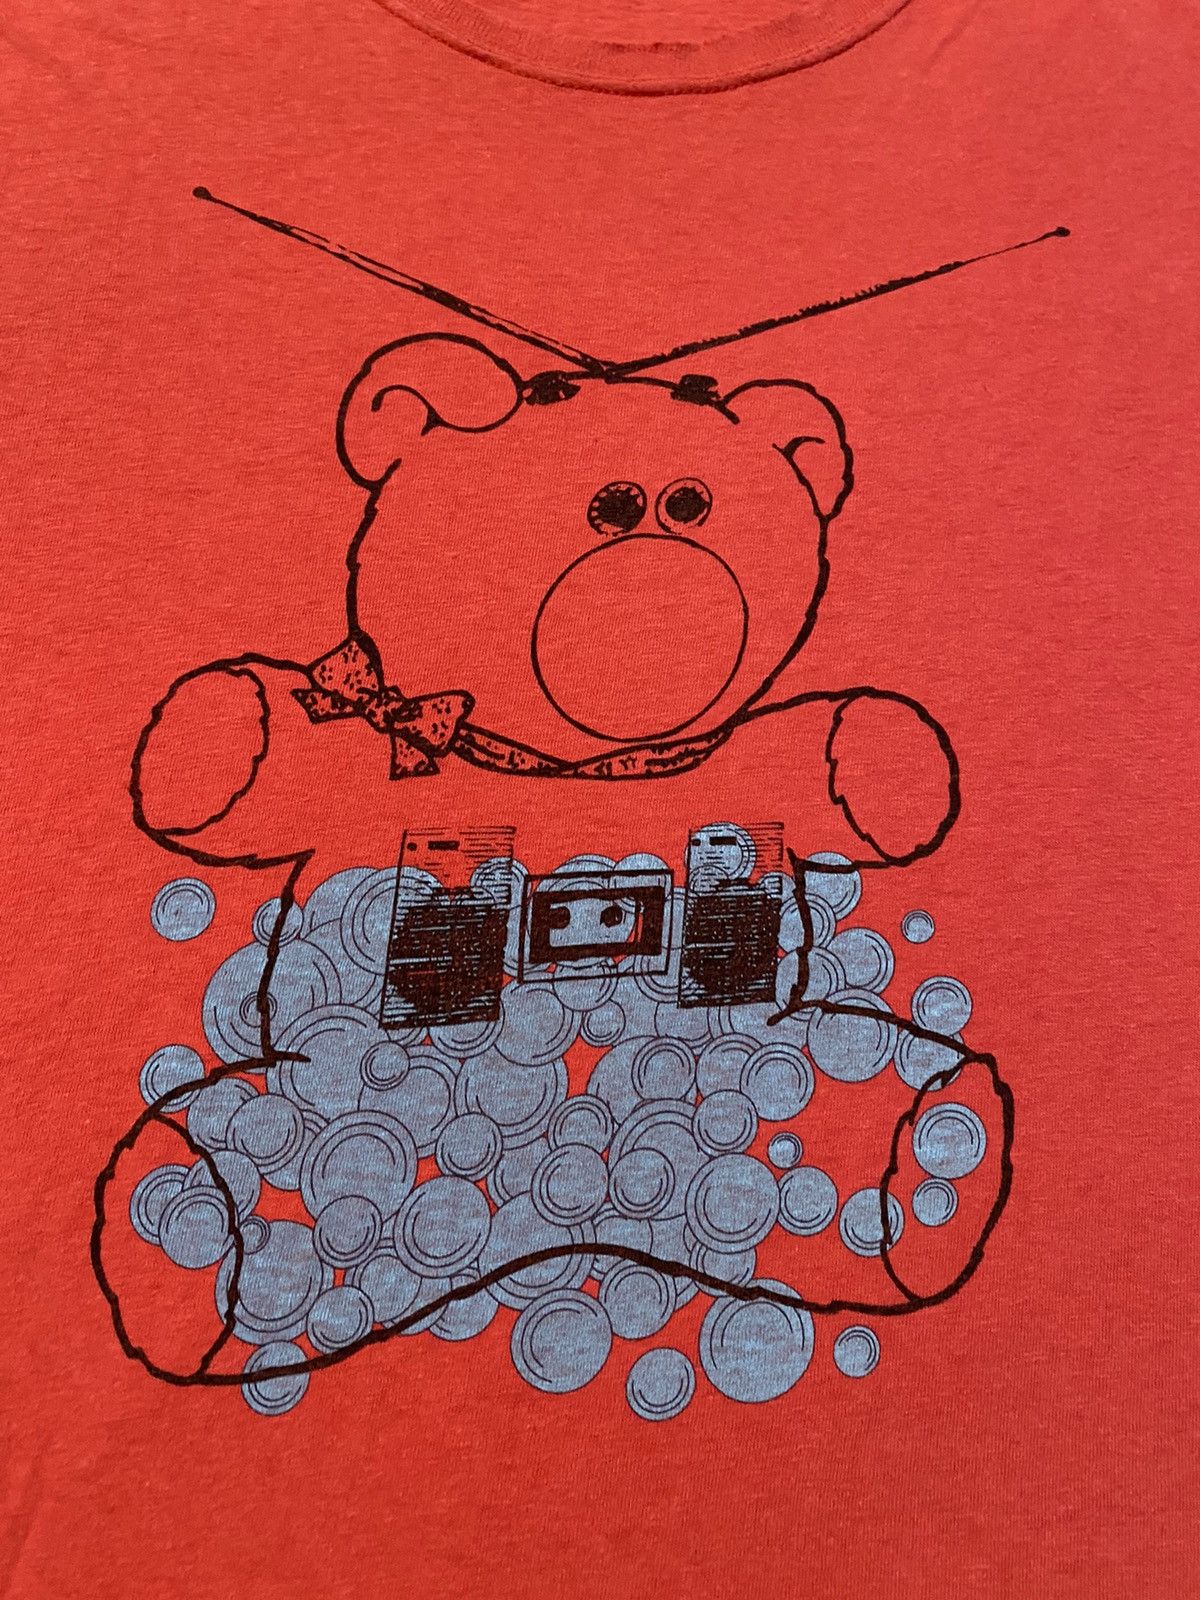 Undercover Undercover Scab Bear Red T-shirt Size US L / EU 52-54 / 3 - 3 Thumbnail